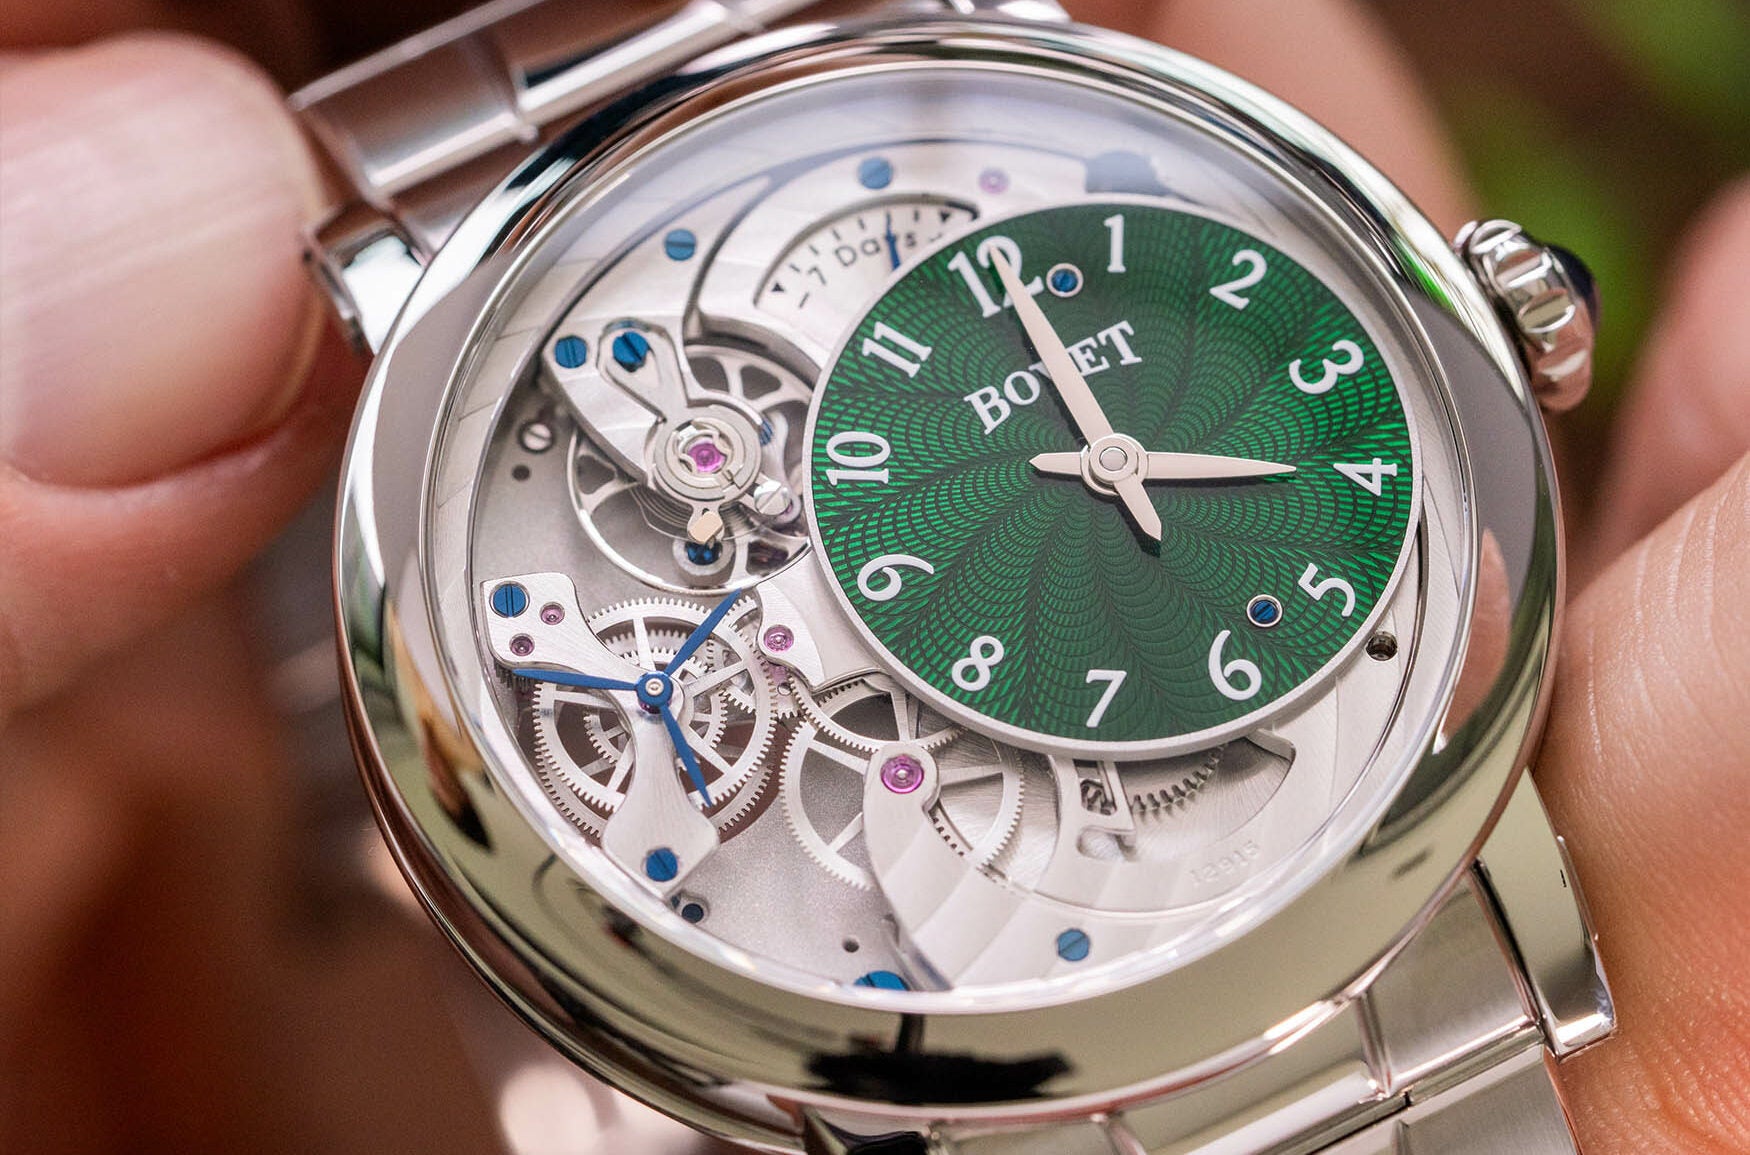 The Bovet Récital 12 is the brand's first bracelet watch in Titanium